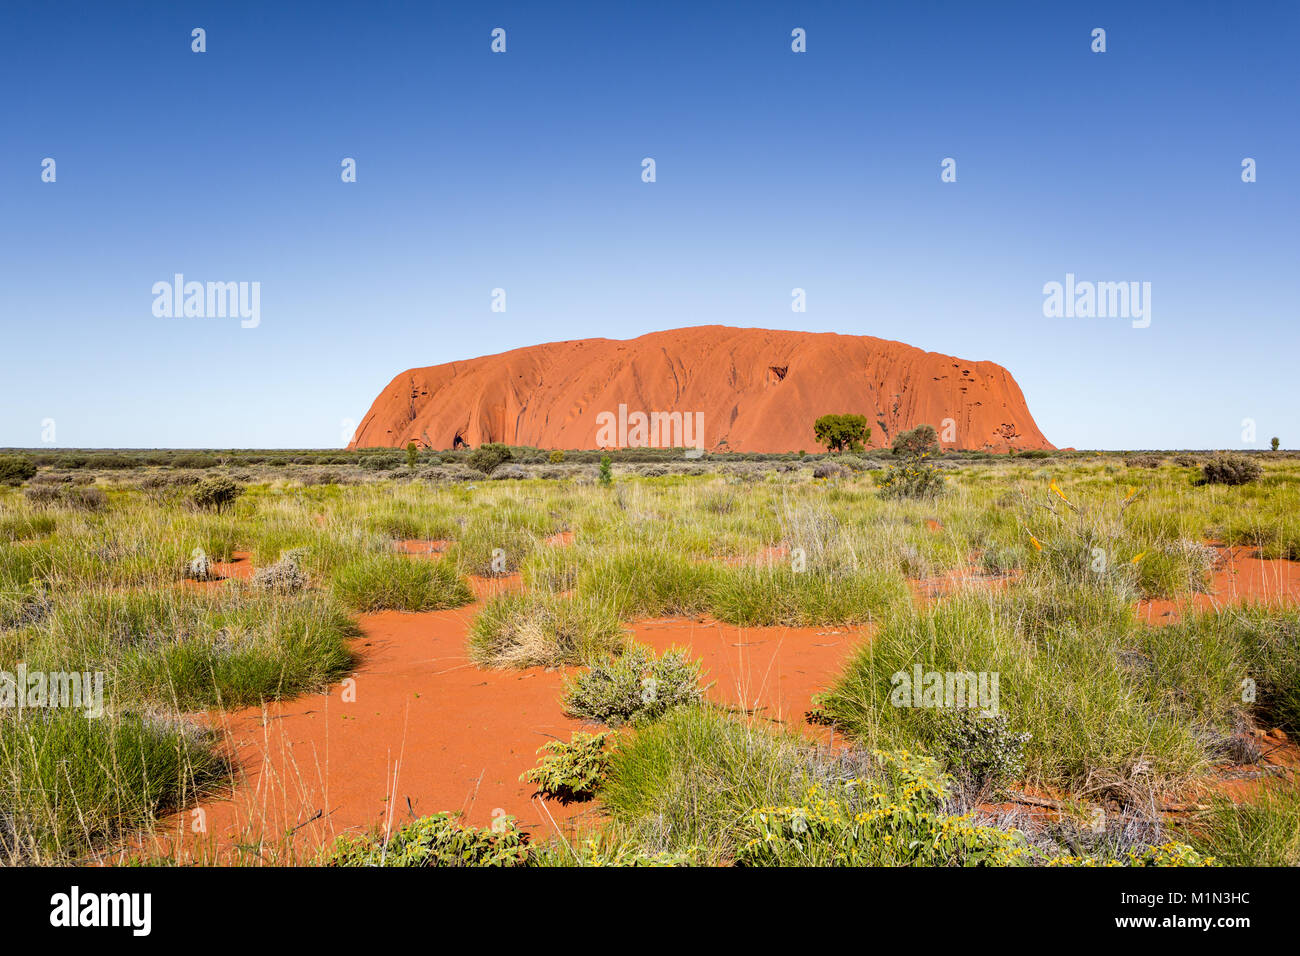 Uluru, Red Center, the great Outback. Northern Territory, Australia Stock Photo